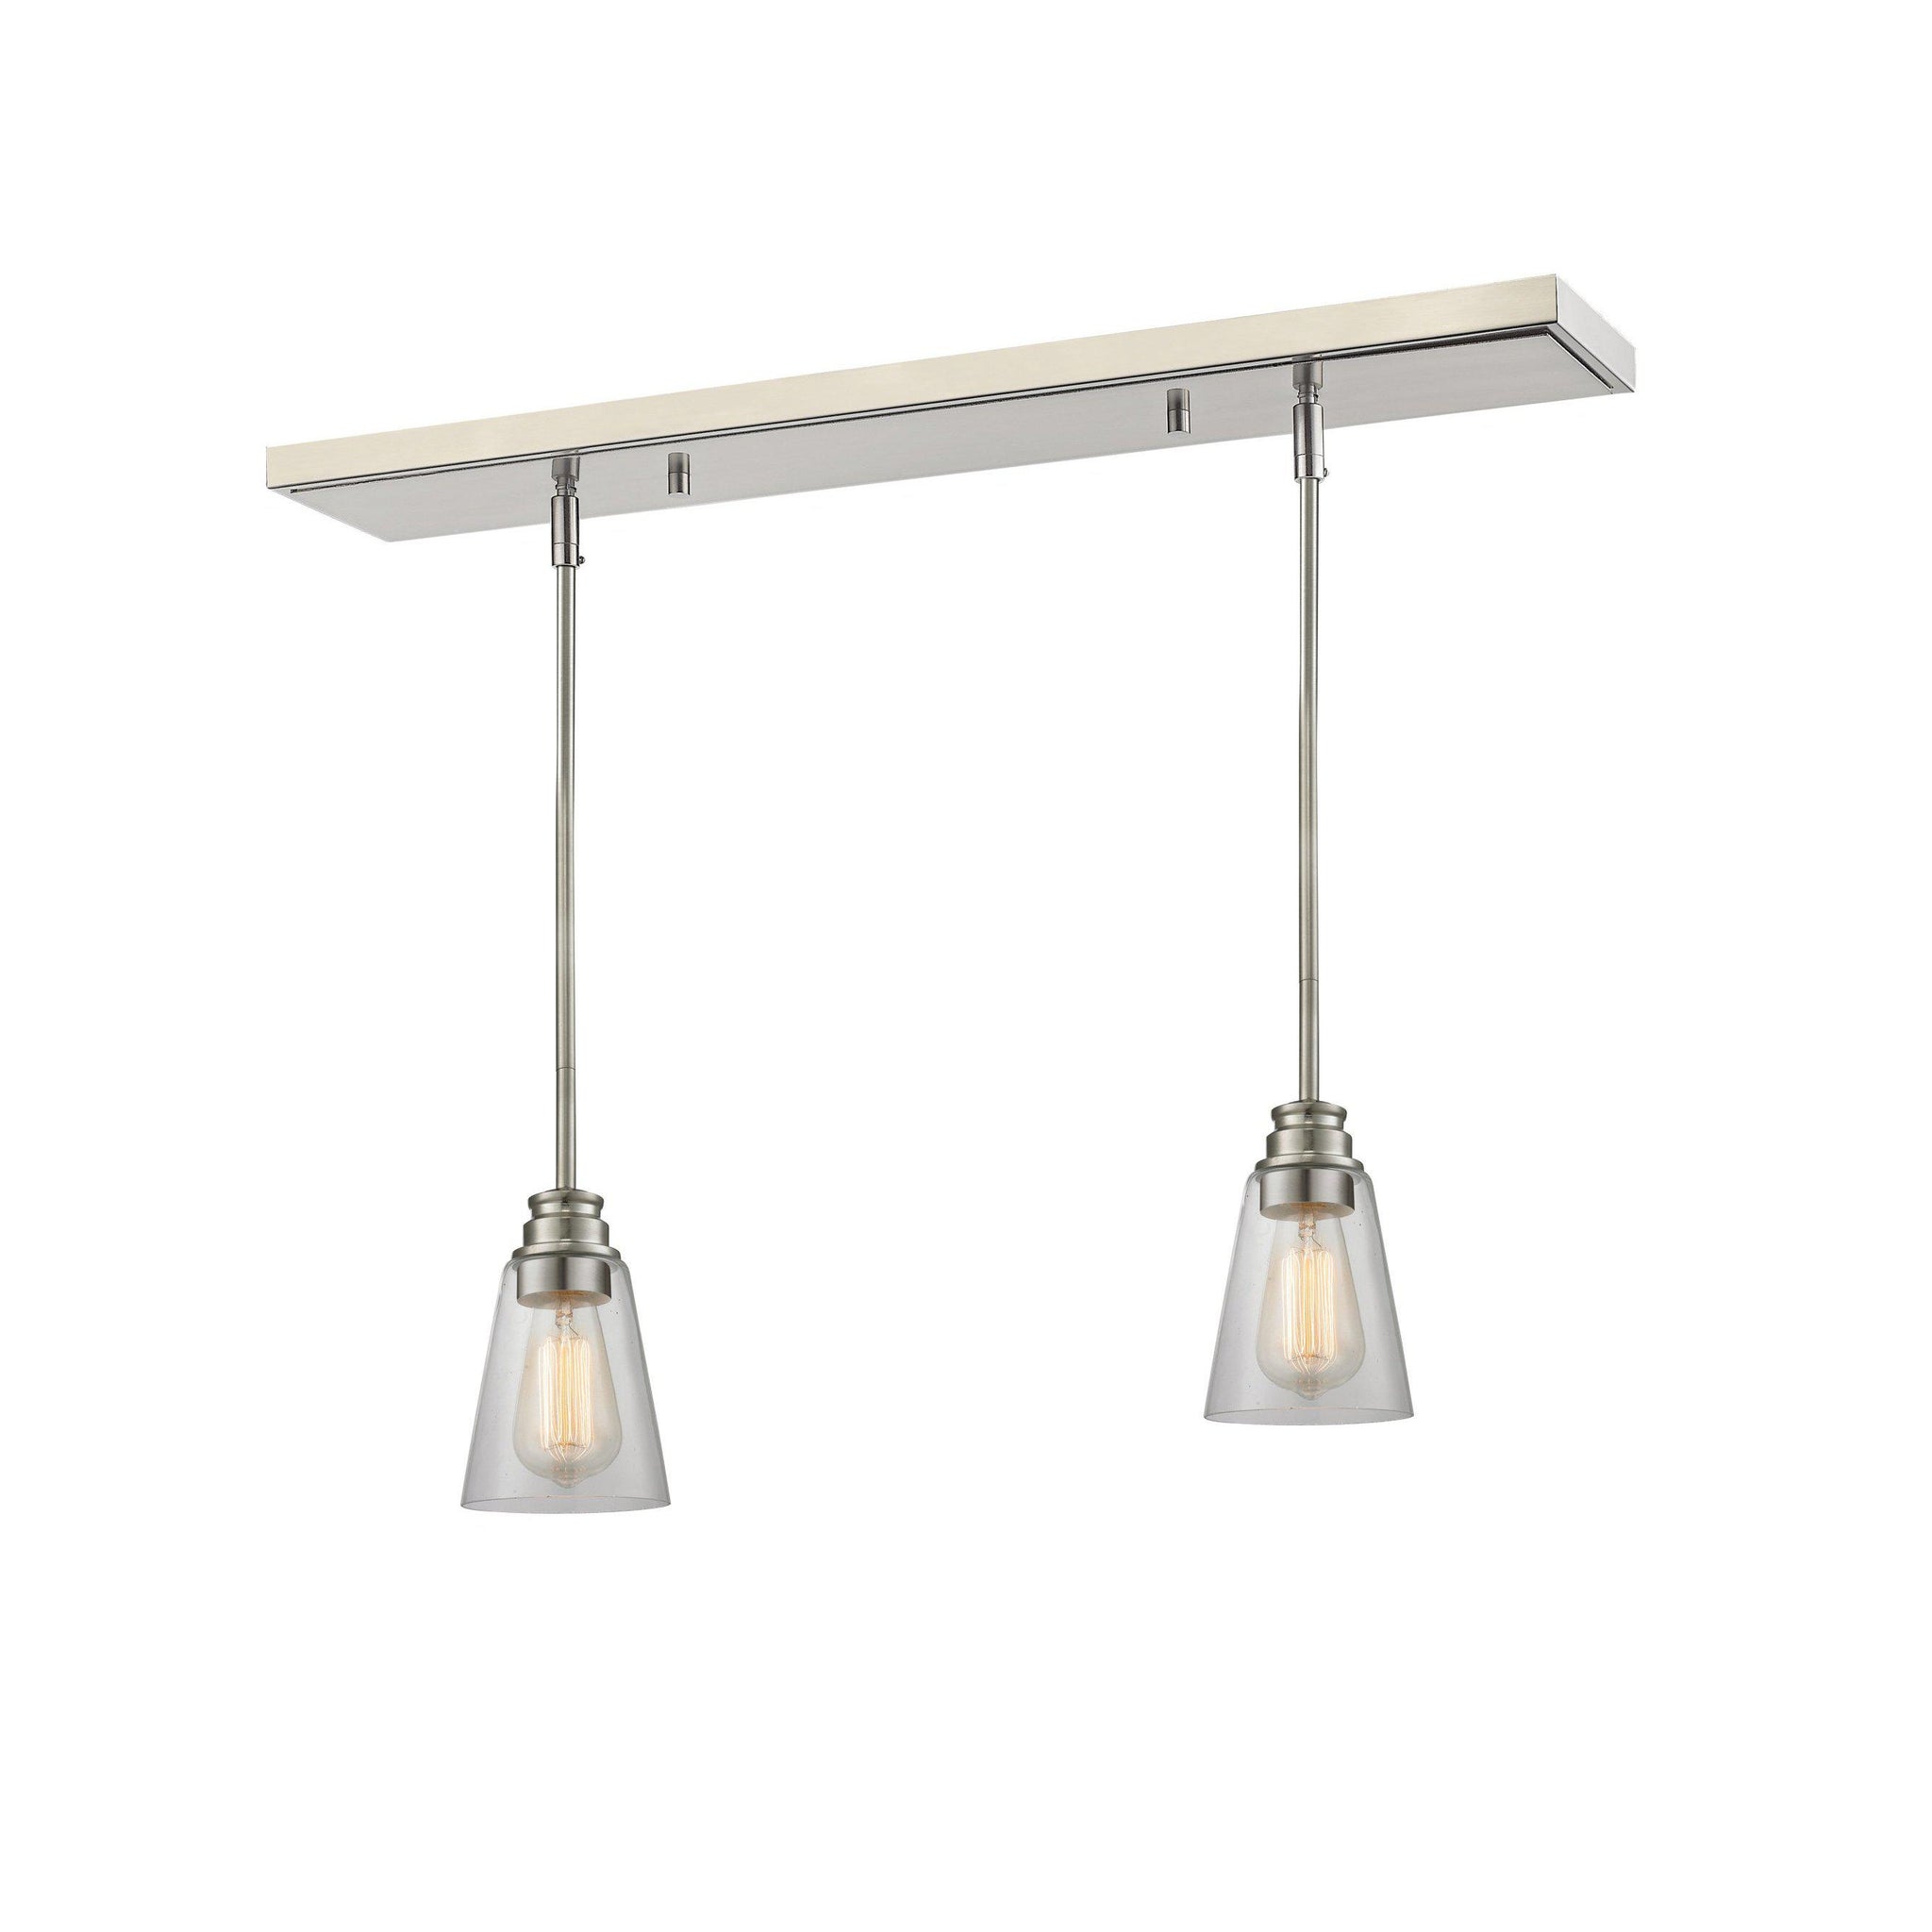 Annora Linear Suspension Brushed Nickel